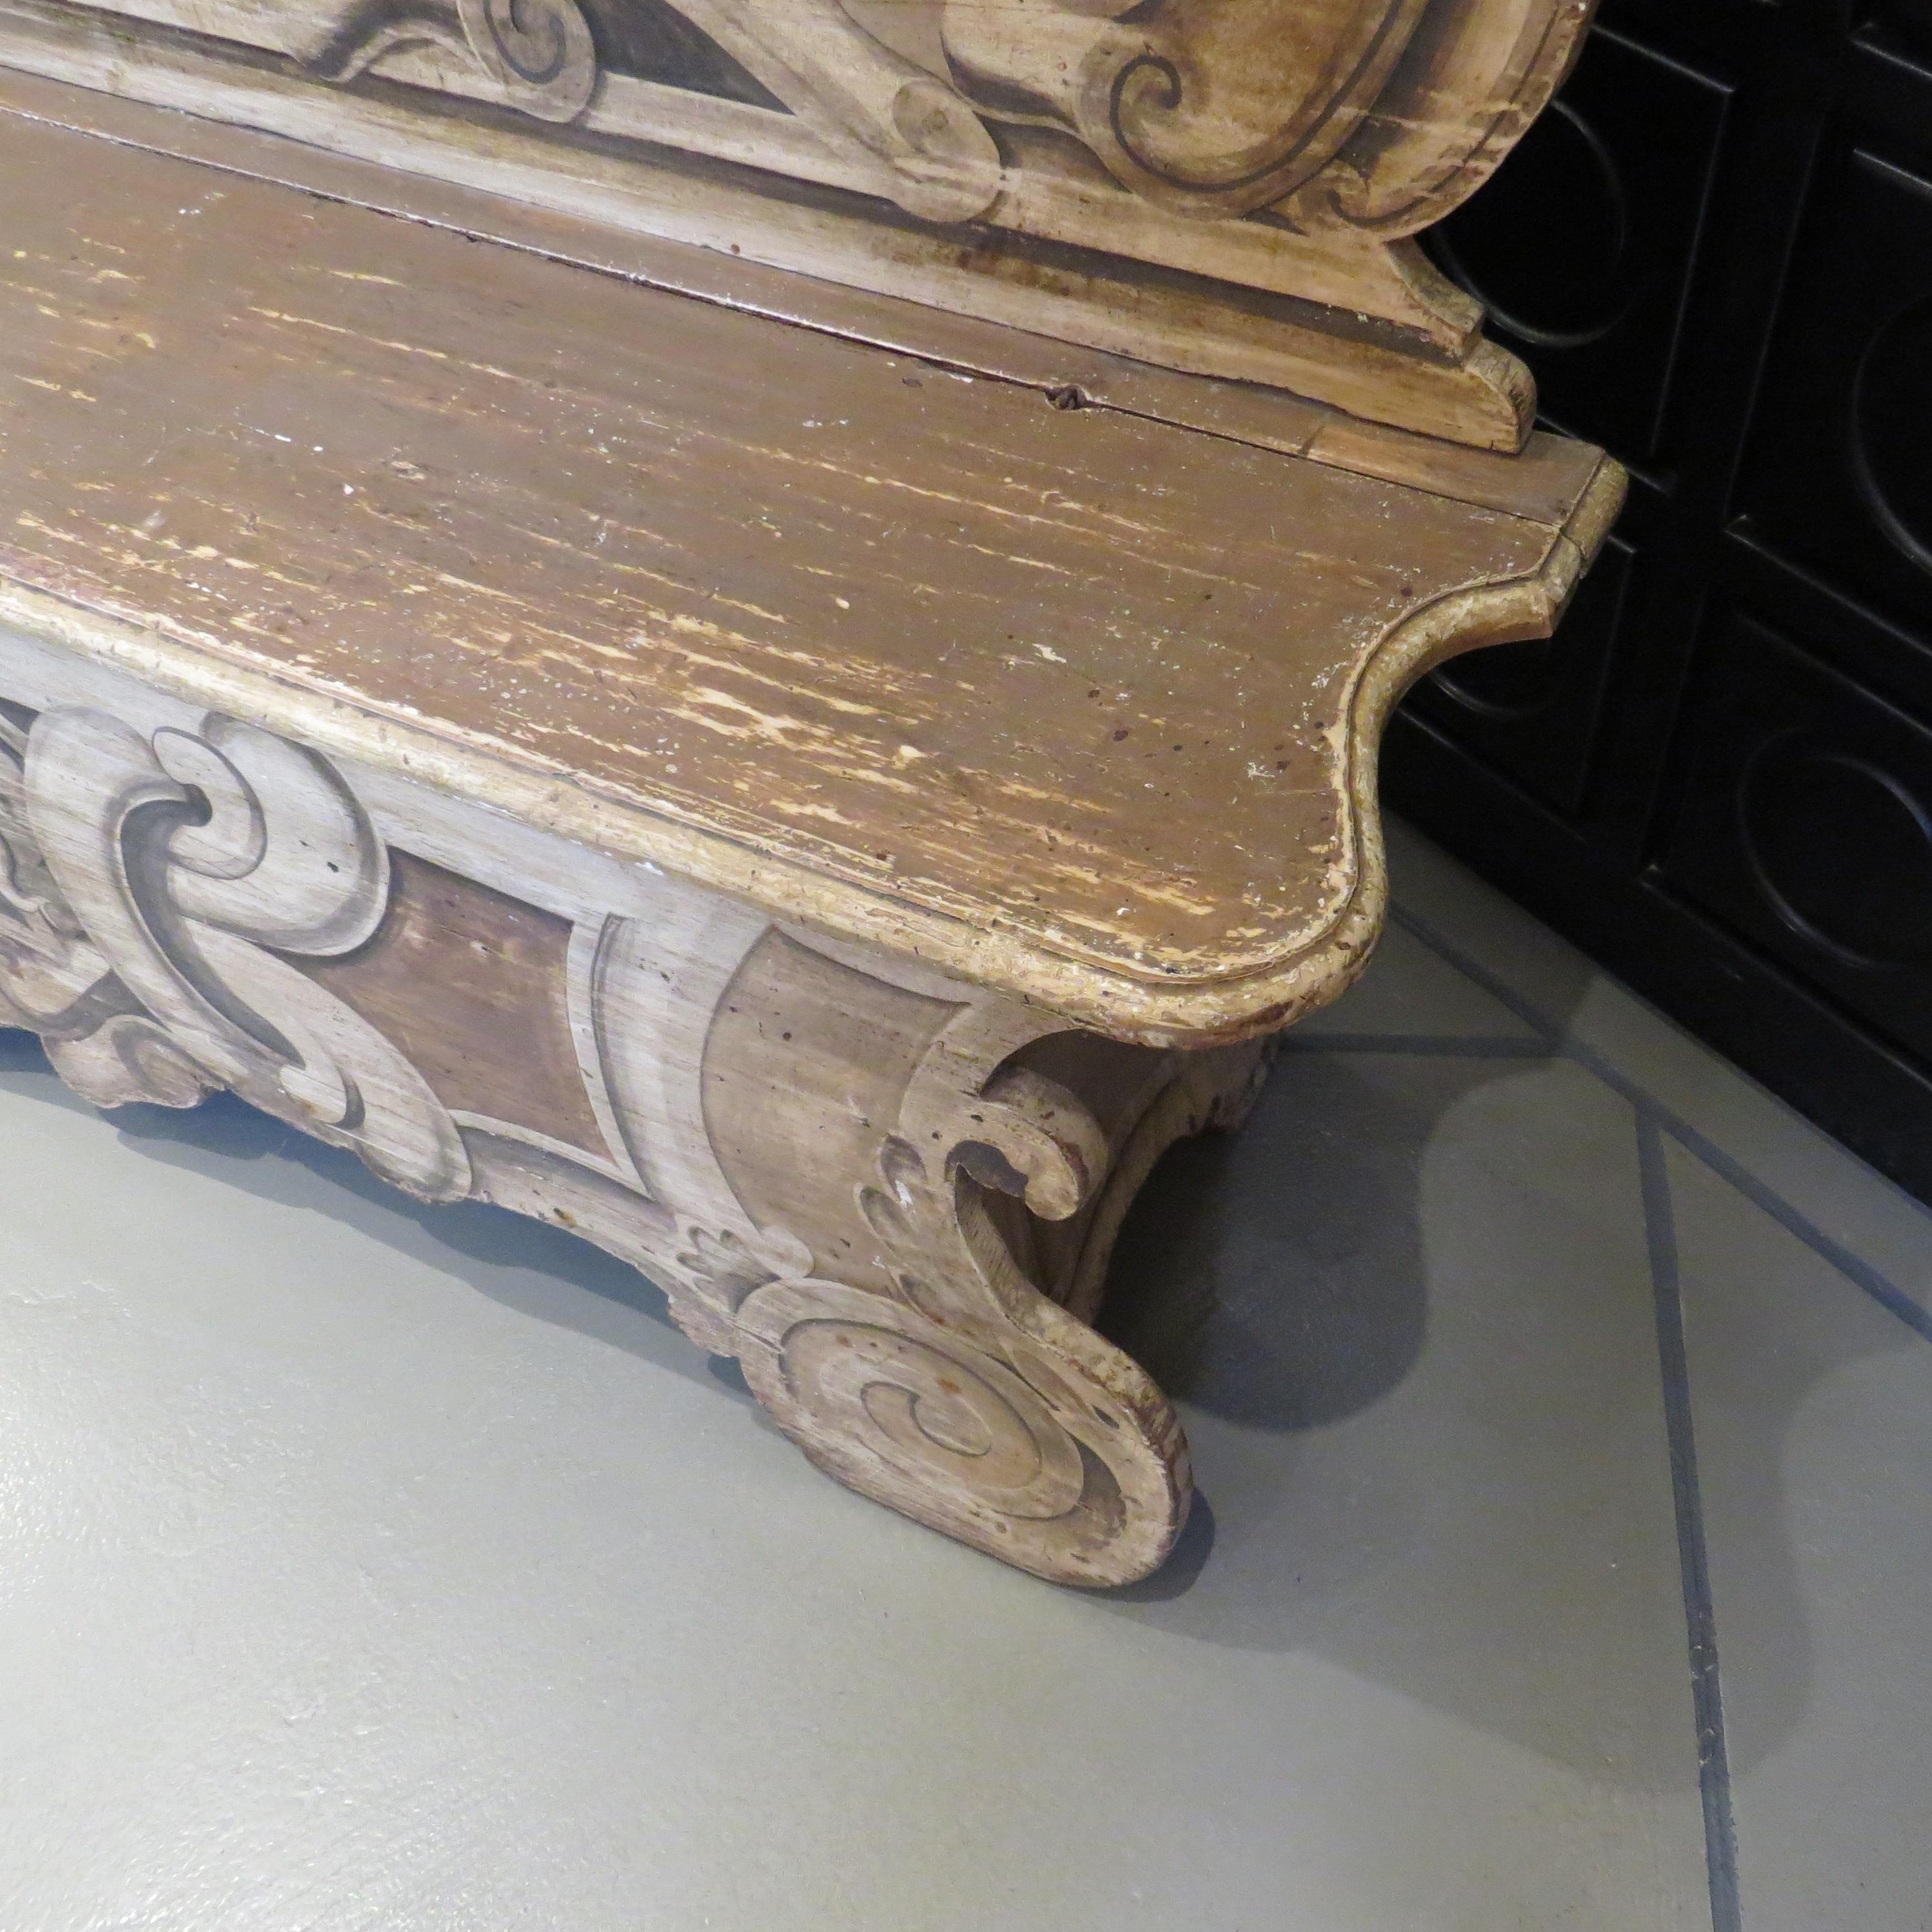 The tall shaped back of the Venetian style bench is hand-painted in gold, tan and charcoal colors. It is made of French oak and has a locking lid on the seat.